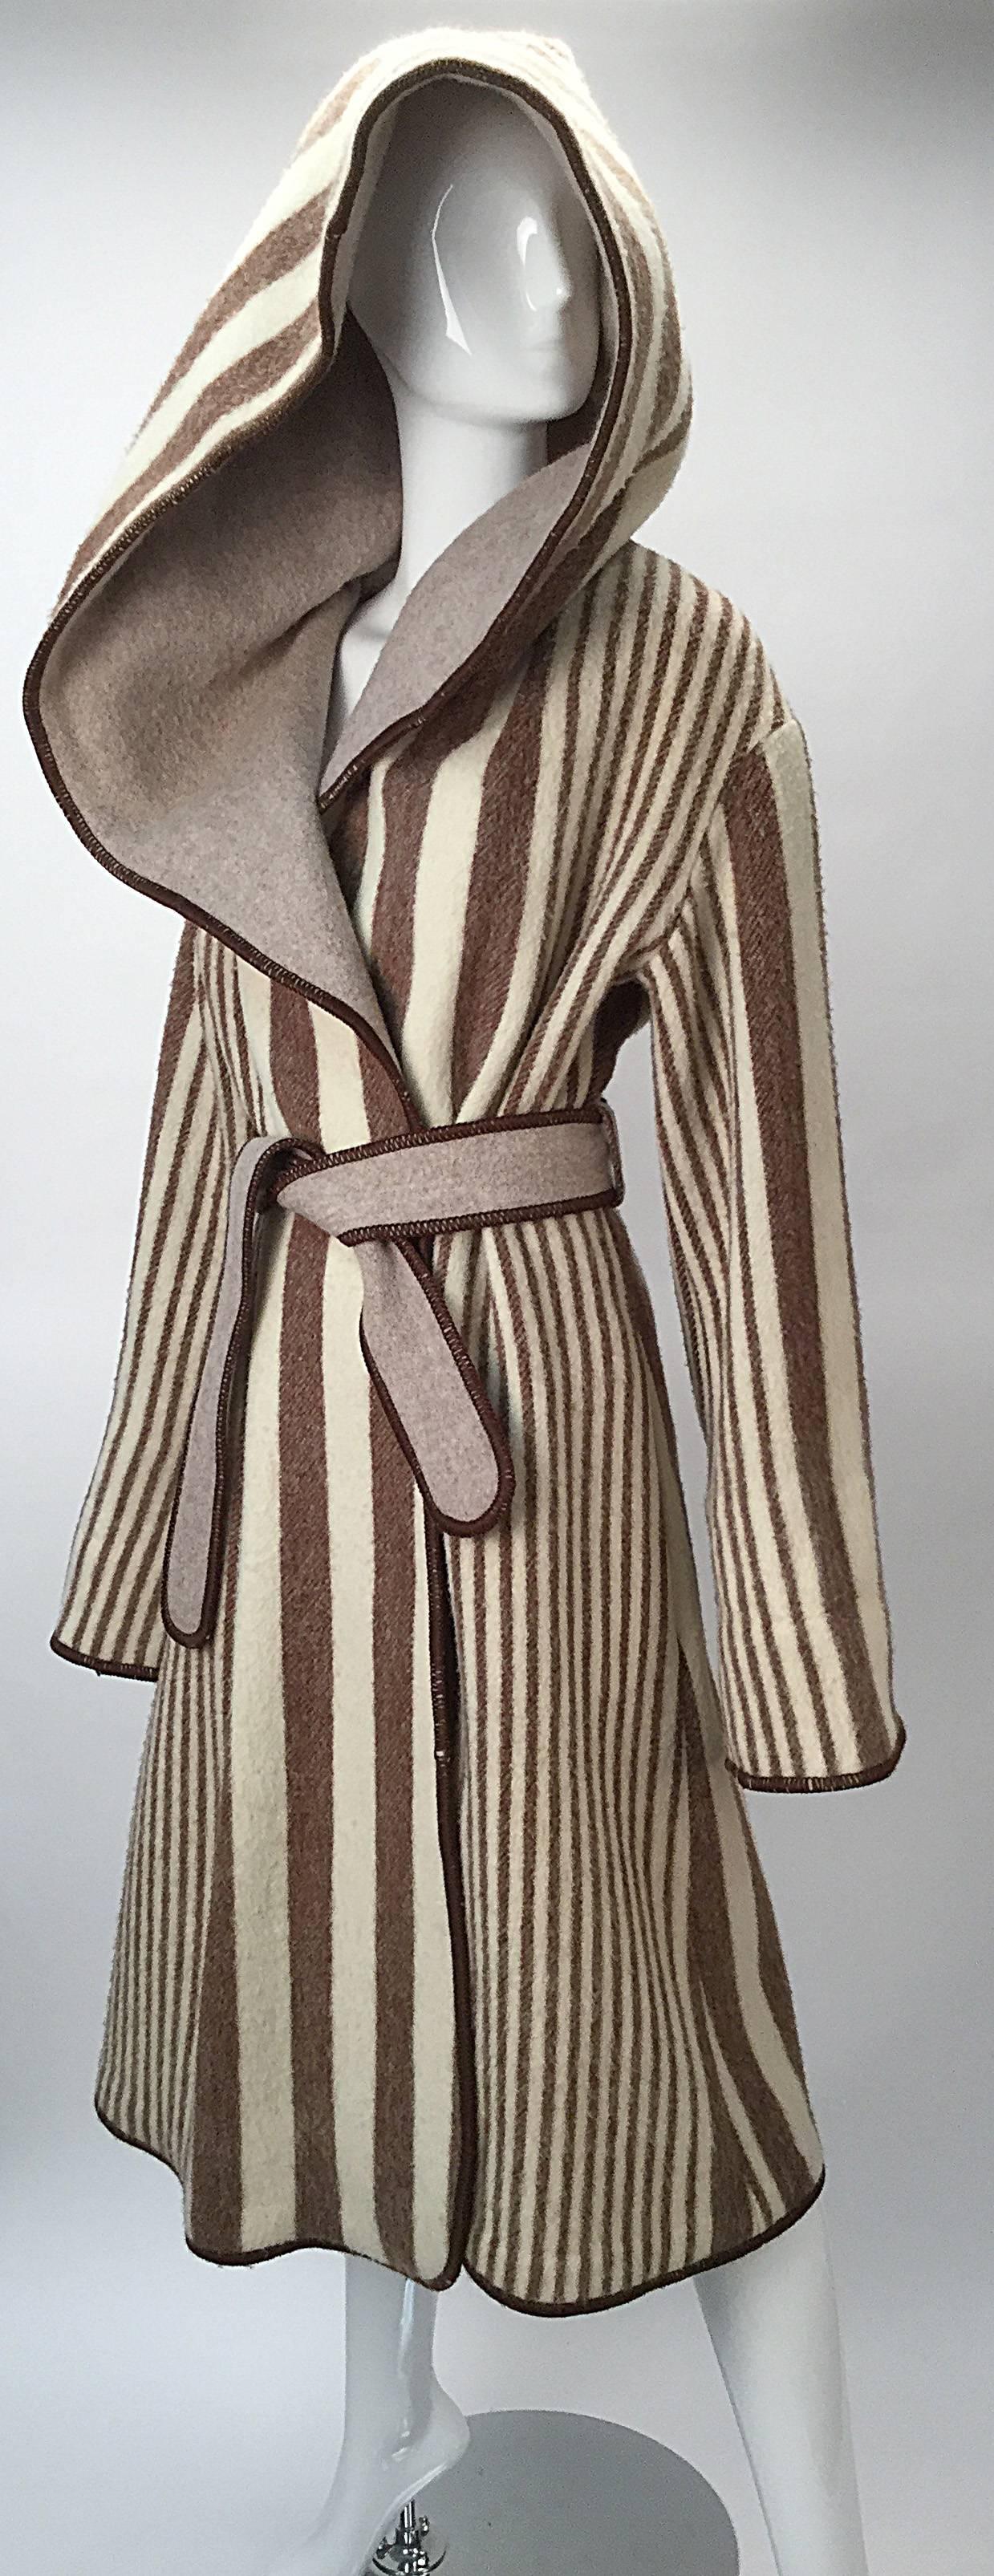 Awesome hooded wrap coat by Vintage Casa De Lama!  Cream and Brown Striped Wrap Coat with deep hood exudes warmth and absolute comfort.

Tan Lapels and belt have brown stitching. 

Super cozy, like a blanket!

Modern size 4/6

Bust: 54